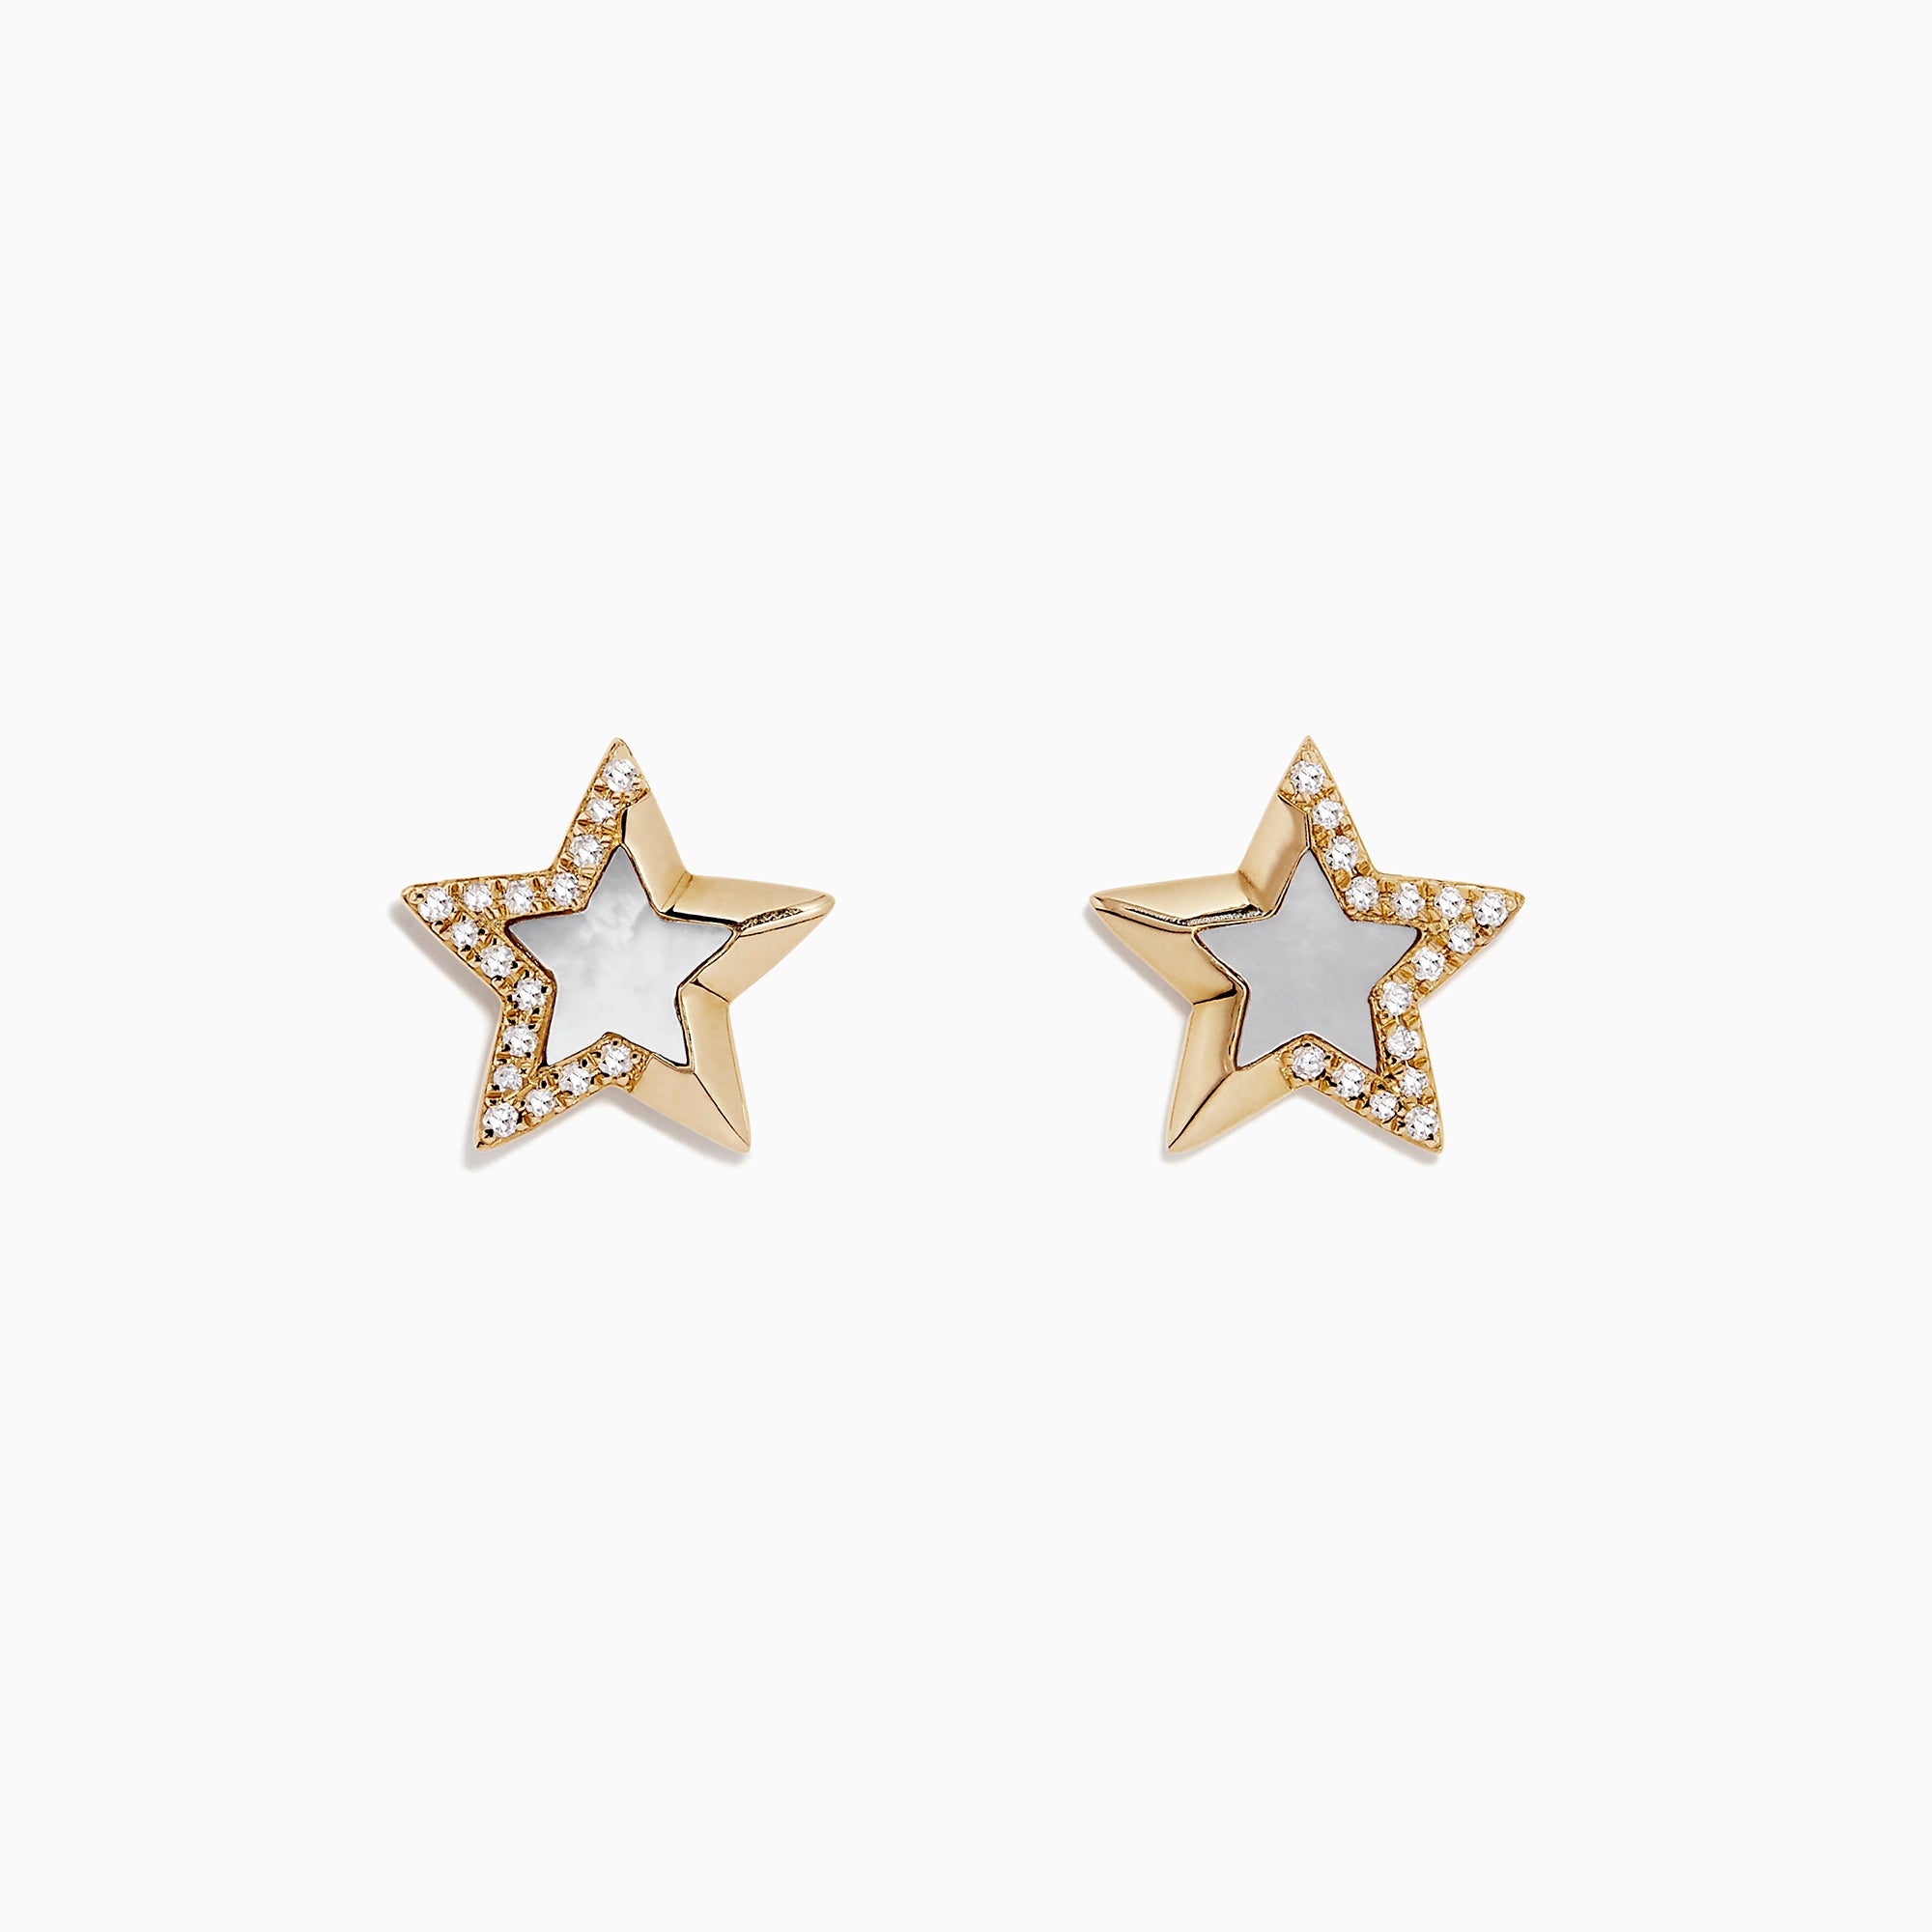 Effy Novelty 14K Gold Mother of Pearl and Diamond Star Earrings, 0.11 TCW